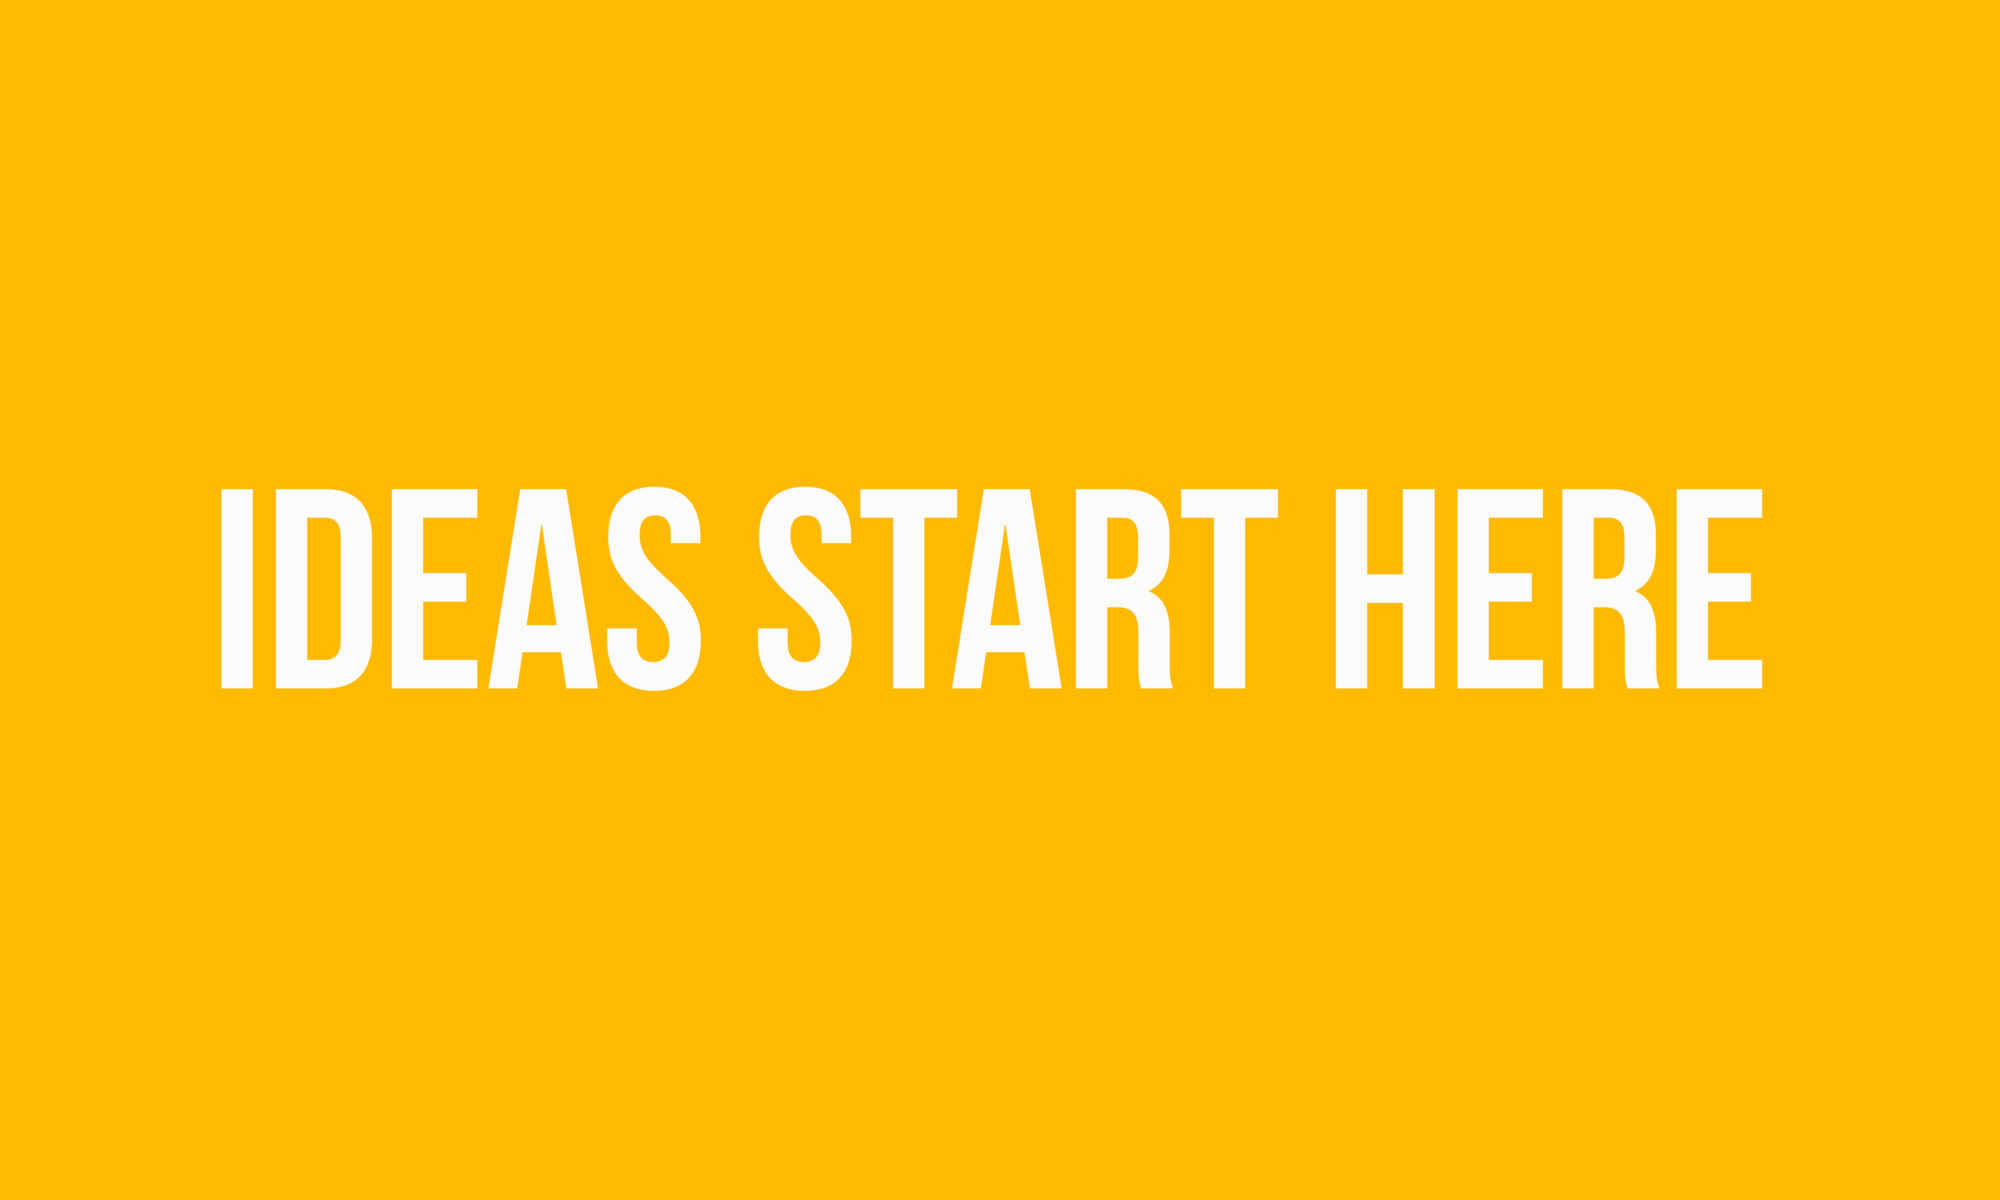 banner with the words "great ideas start here"